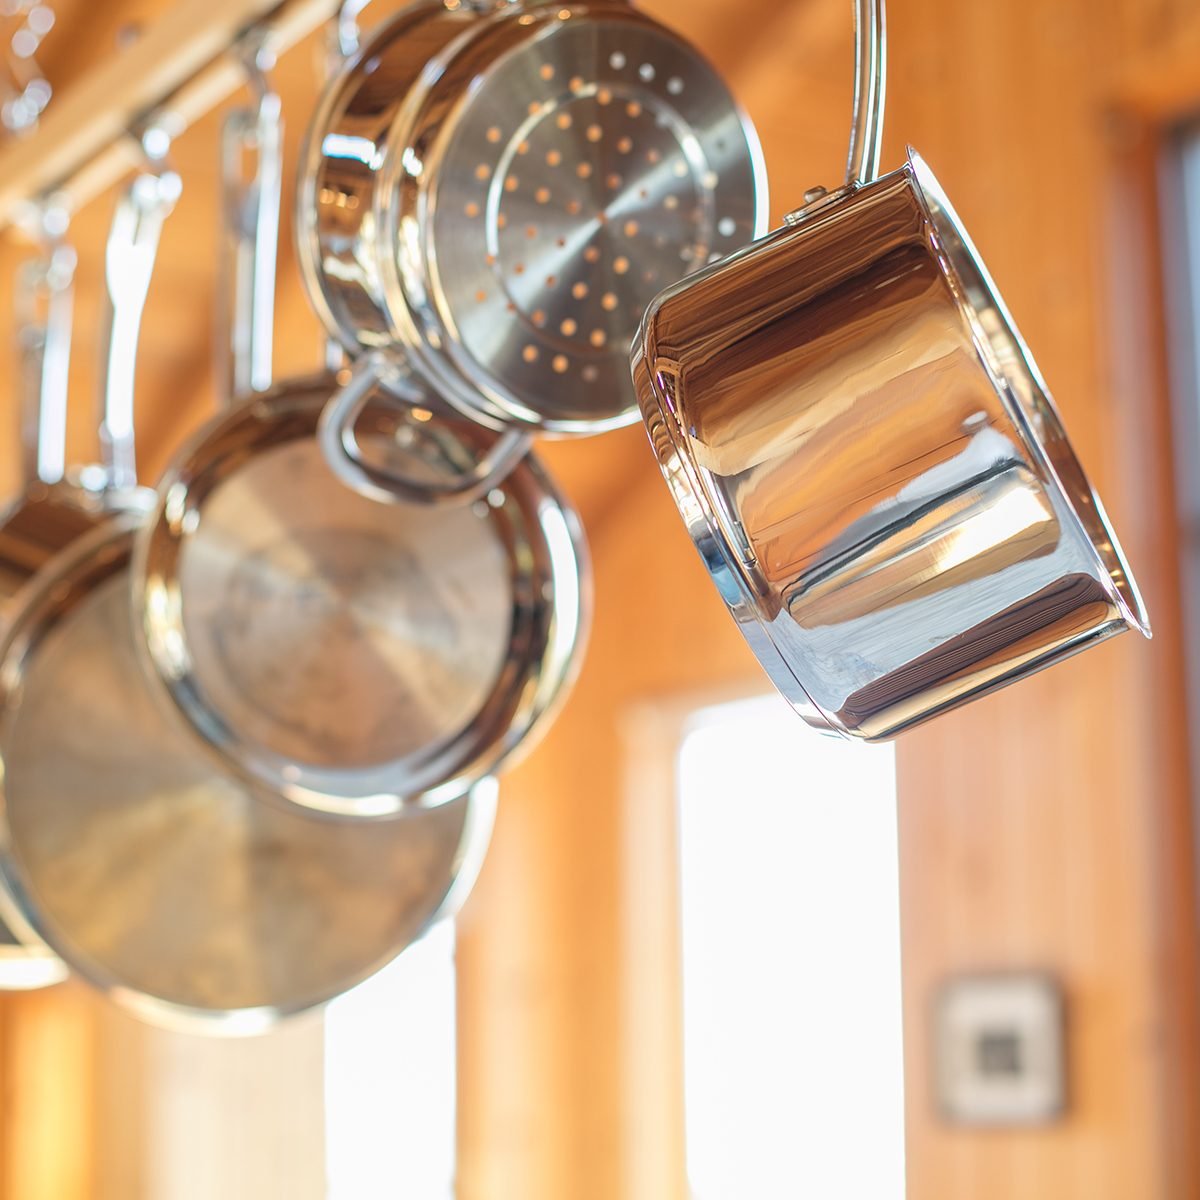 https://www.tasteofhome.com/wp-content/uploads/2019/04/pots-and-pans-hanging-in-kitchen-from-wood-rack-GettyImages-1064003760.jpg?fit=700%2C1024